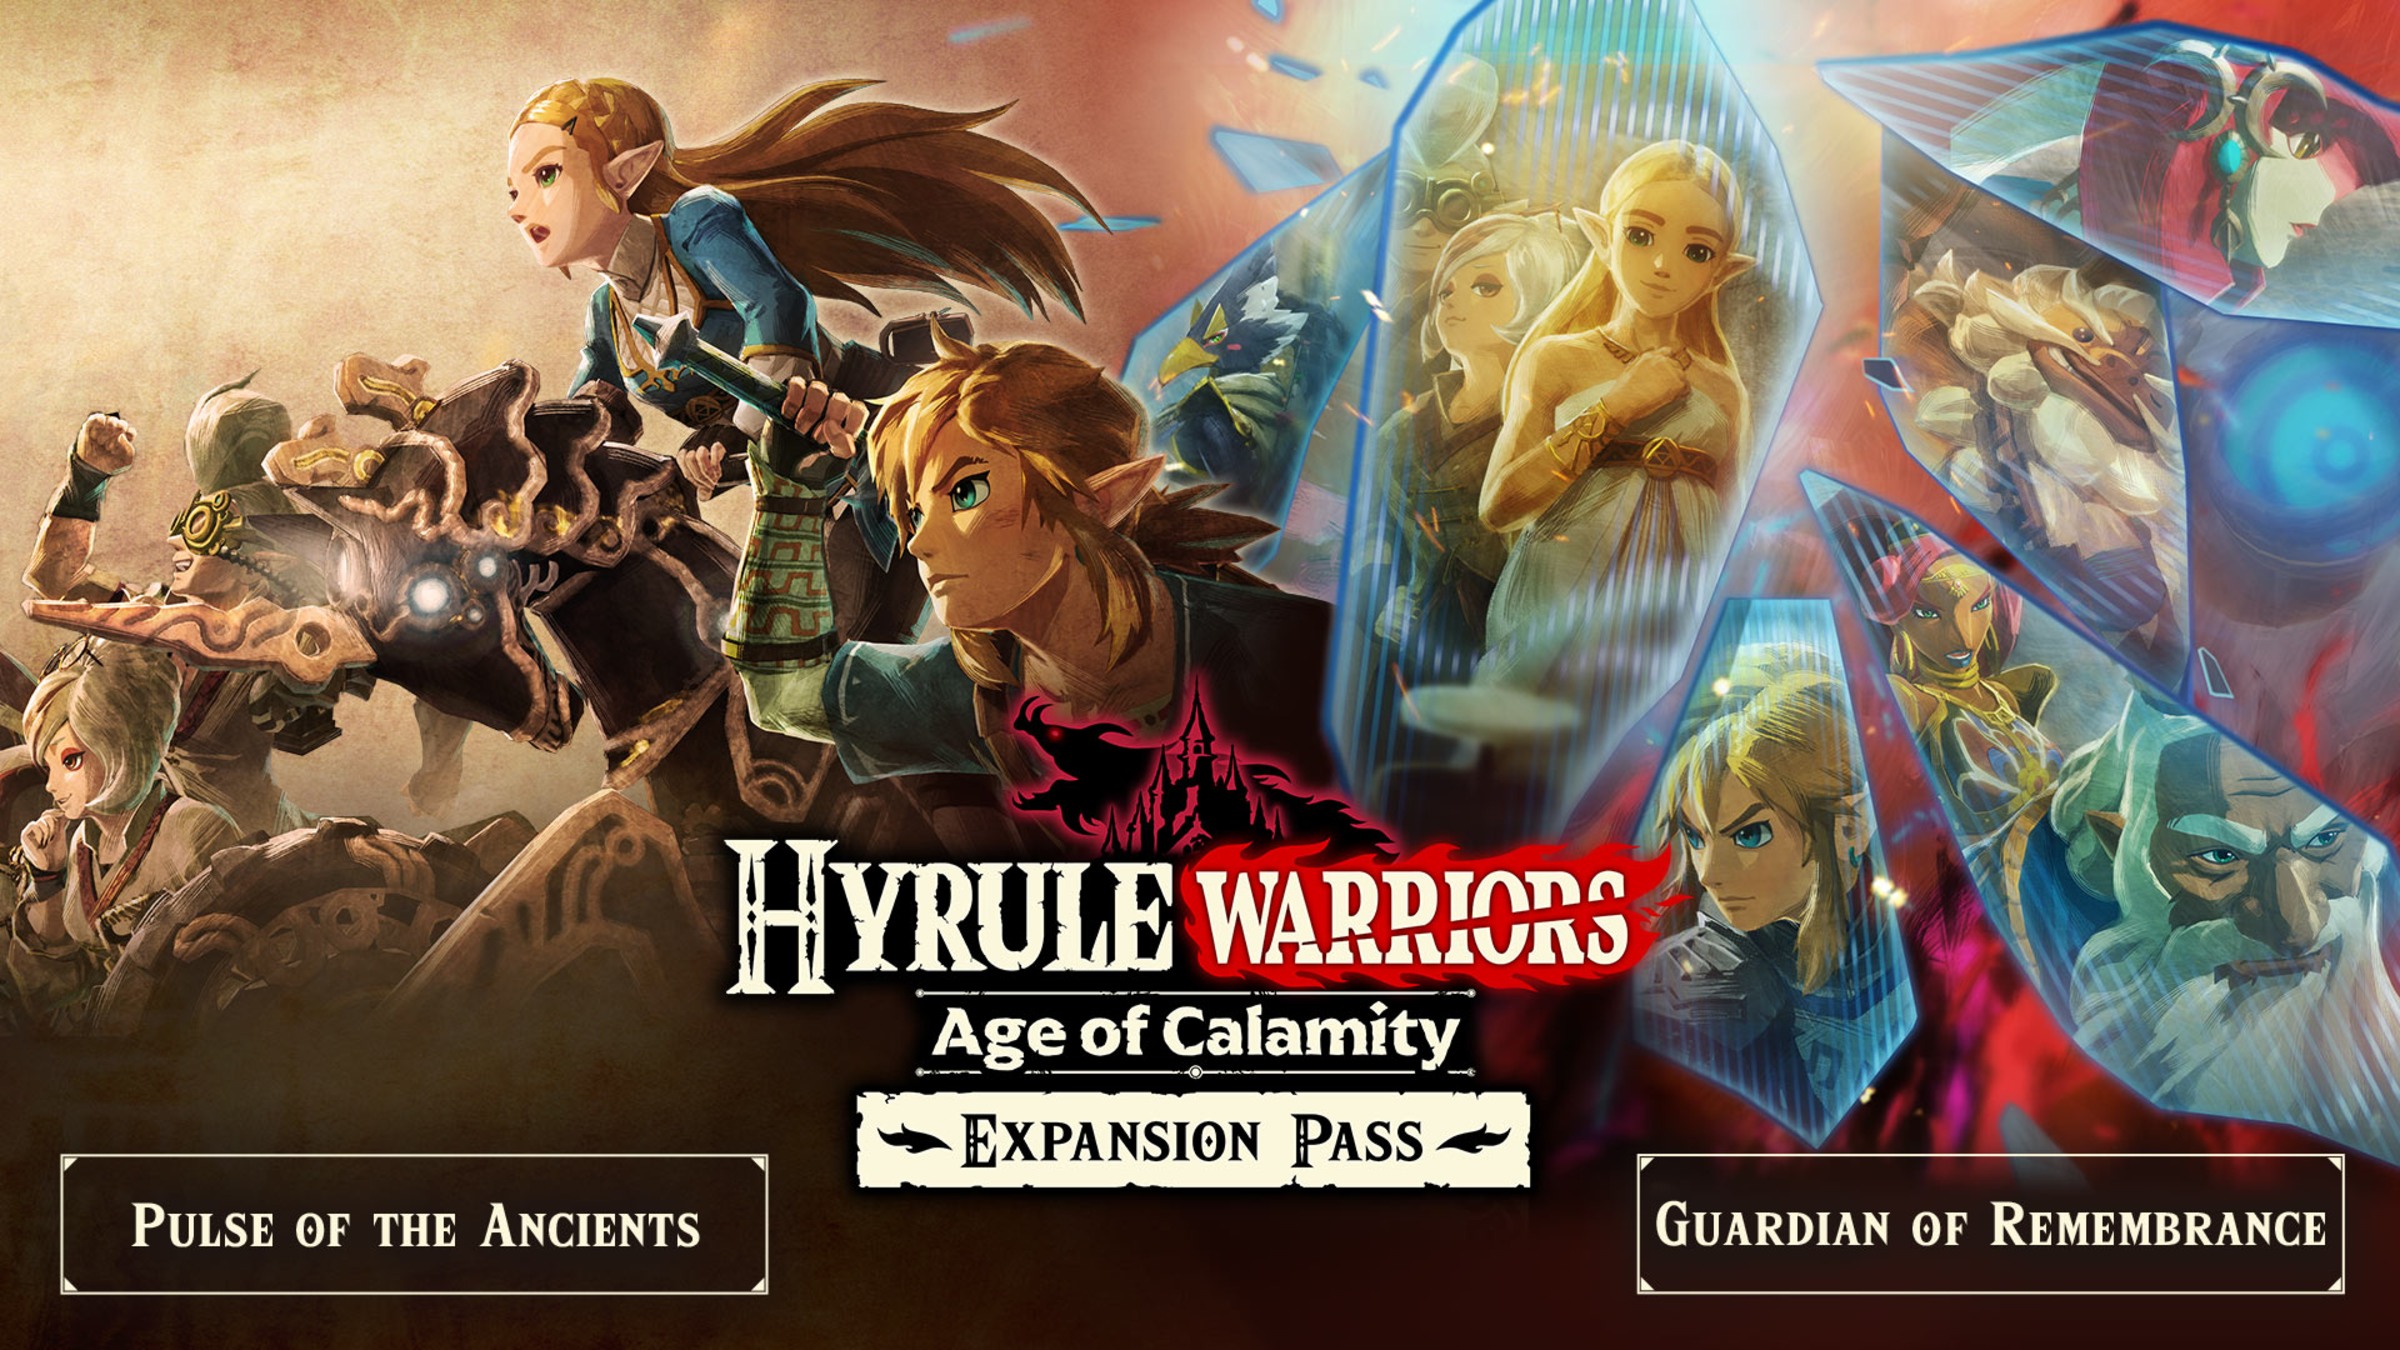 Hyrule Warriors: Age of Calamity Expansion Pass for Nintendo Switch -  Nintendo Official Site